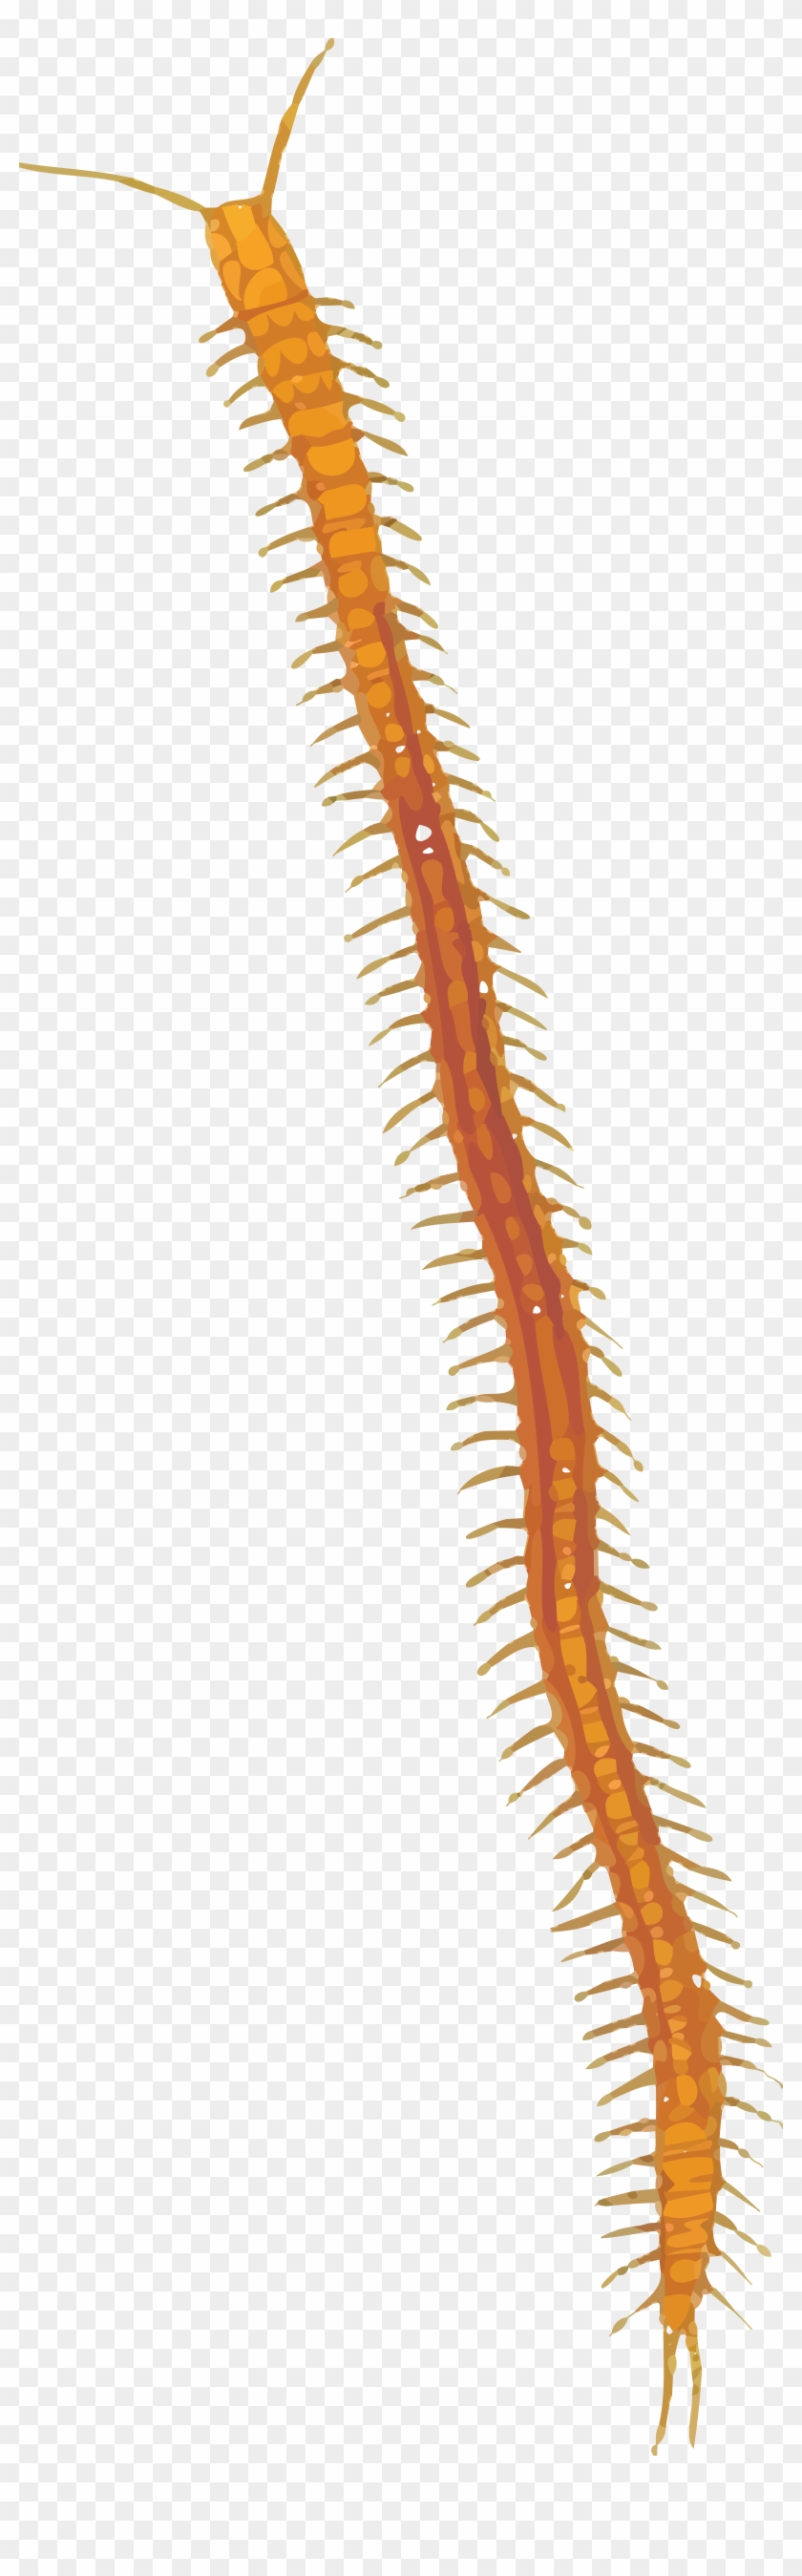 Free Clipart Of A Centipede - Free Clipart Of A Centipede #970937